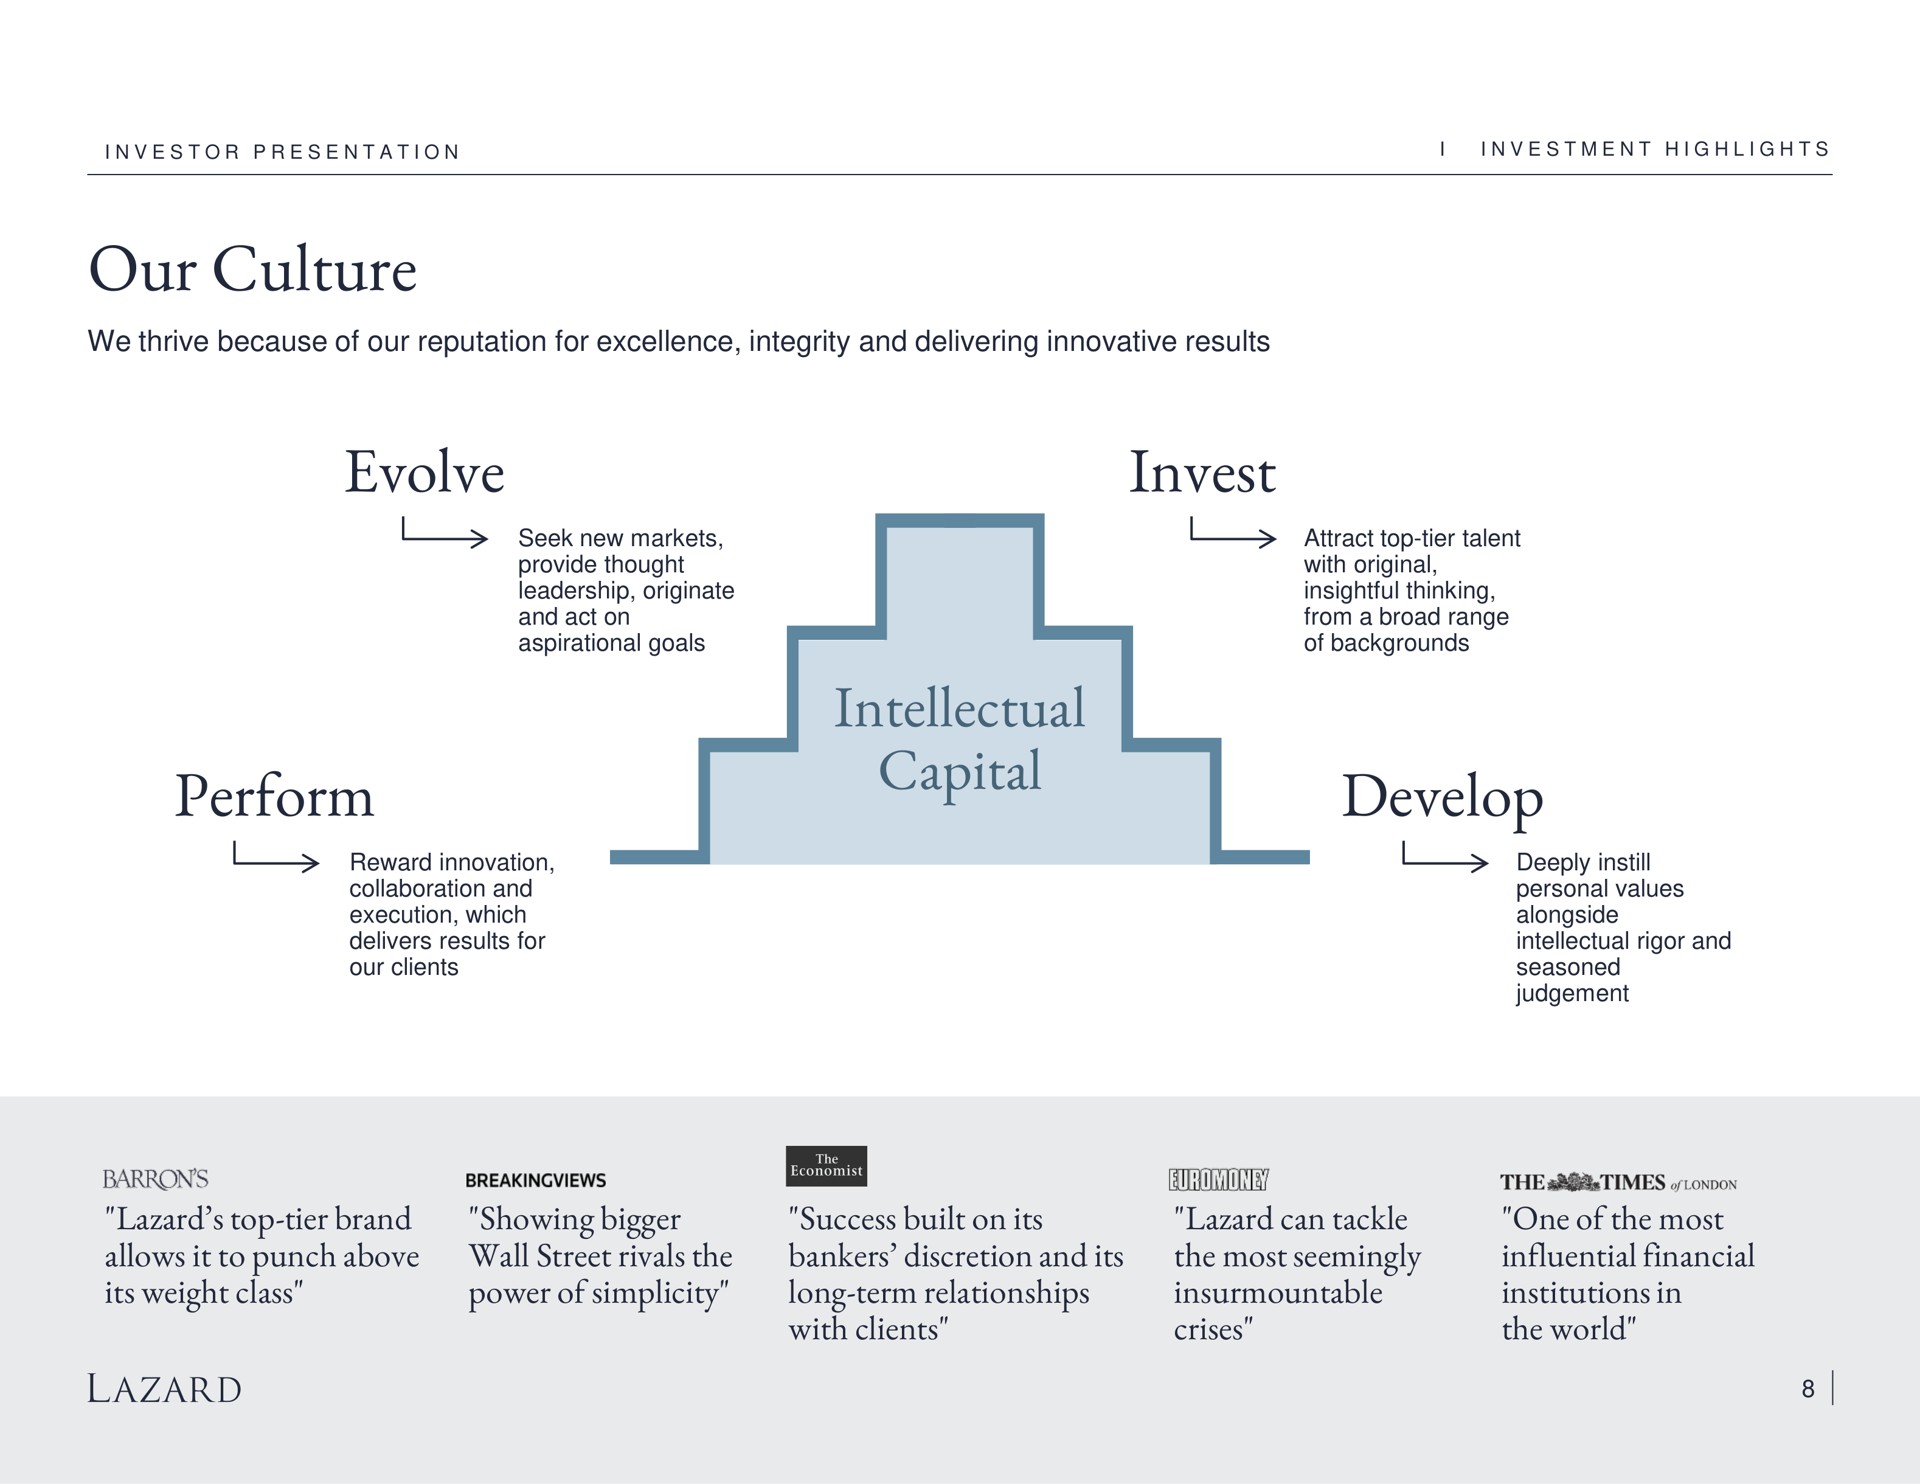 our culture evolve invest intellectual capital perform develop top tier brand allows it to punch above its weight class showing bigger wall street rivals the power of simplicity success built on its bankers discretion and its long term relationships with clients can tackle the most seemingly insurmountable crises one of the most influential financial institutions in the world deeply instill | Lazard